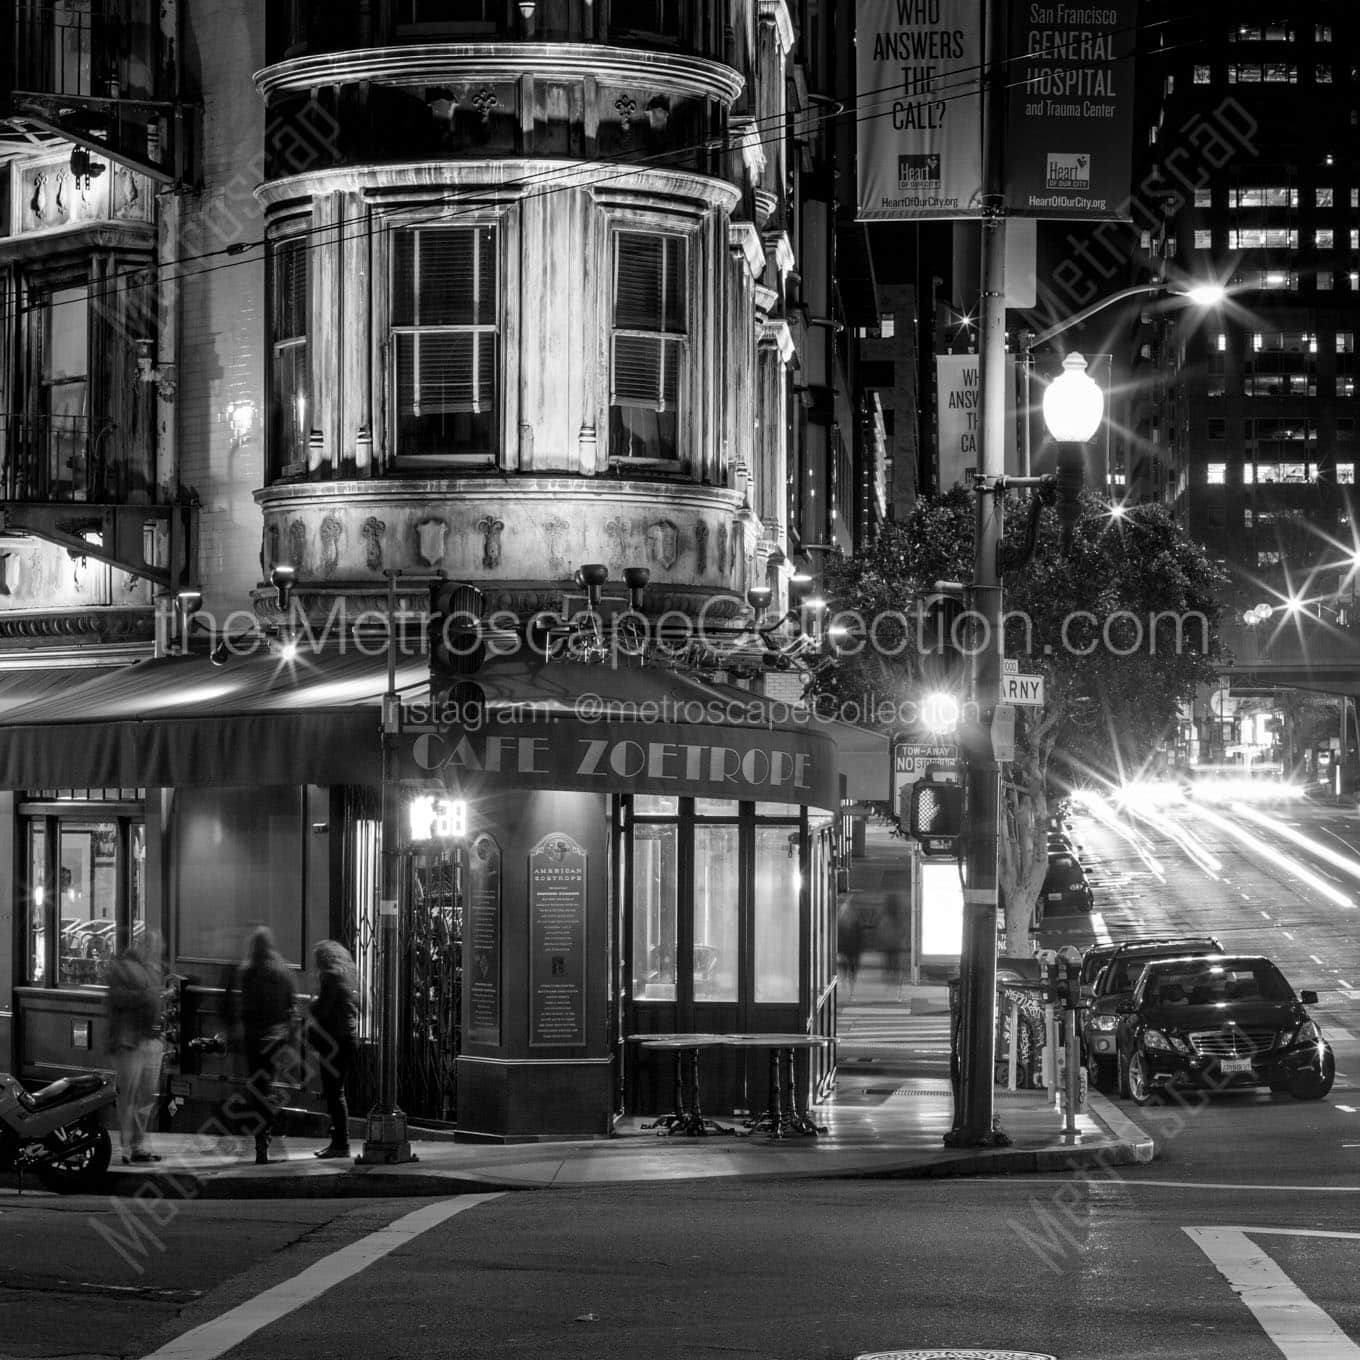 cafe zoetrope at night francis ford coppola Black & White Wall Art